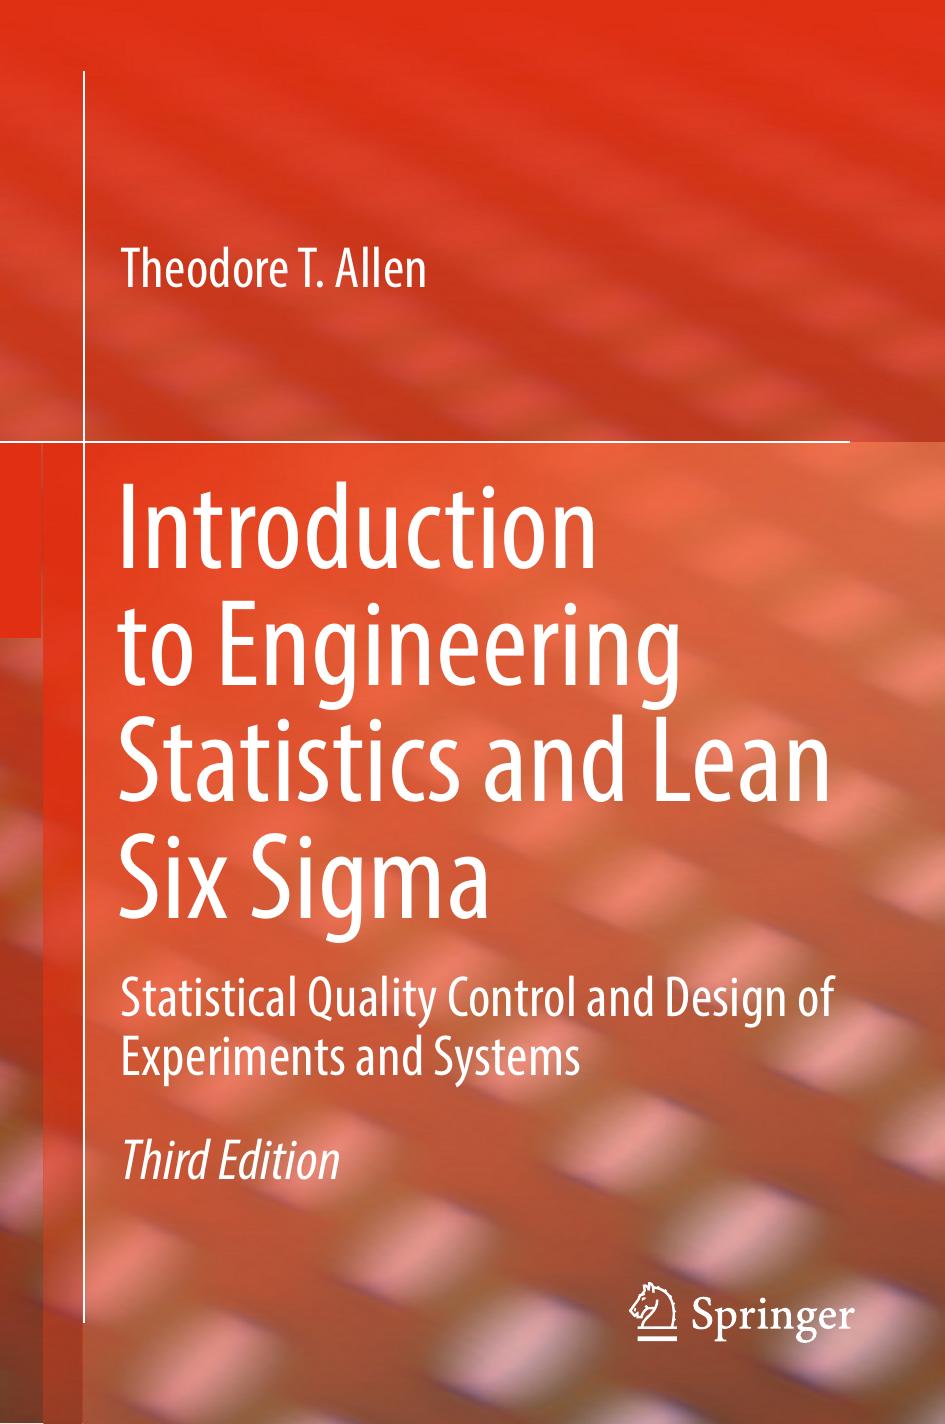 Introduction to Engineering Statistics and Lean Six Sigma Statistical Quality Control and Design of Experiments and Systems 2019